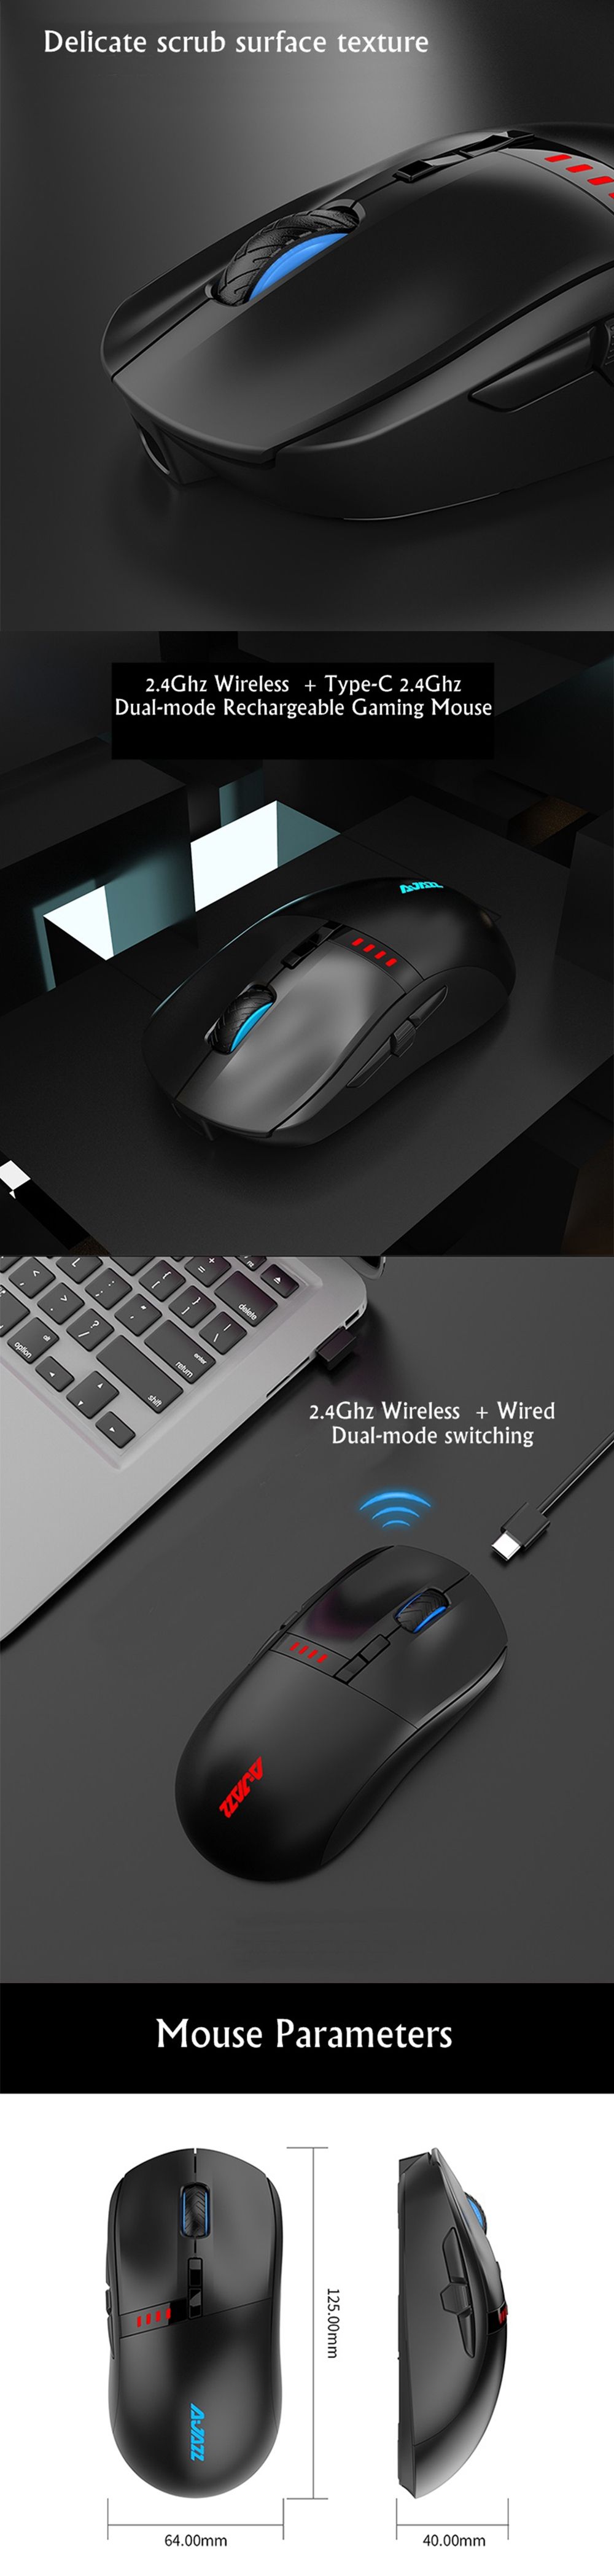 Ajazz-i305Pro-Dual-Mode-Type-C-Wired--24G-Wireless-16000DPI-Optical-Mouse-Rechargeable-Gaming-Mouse-1589543